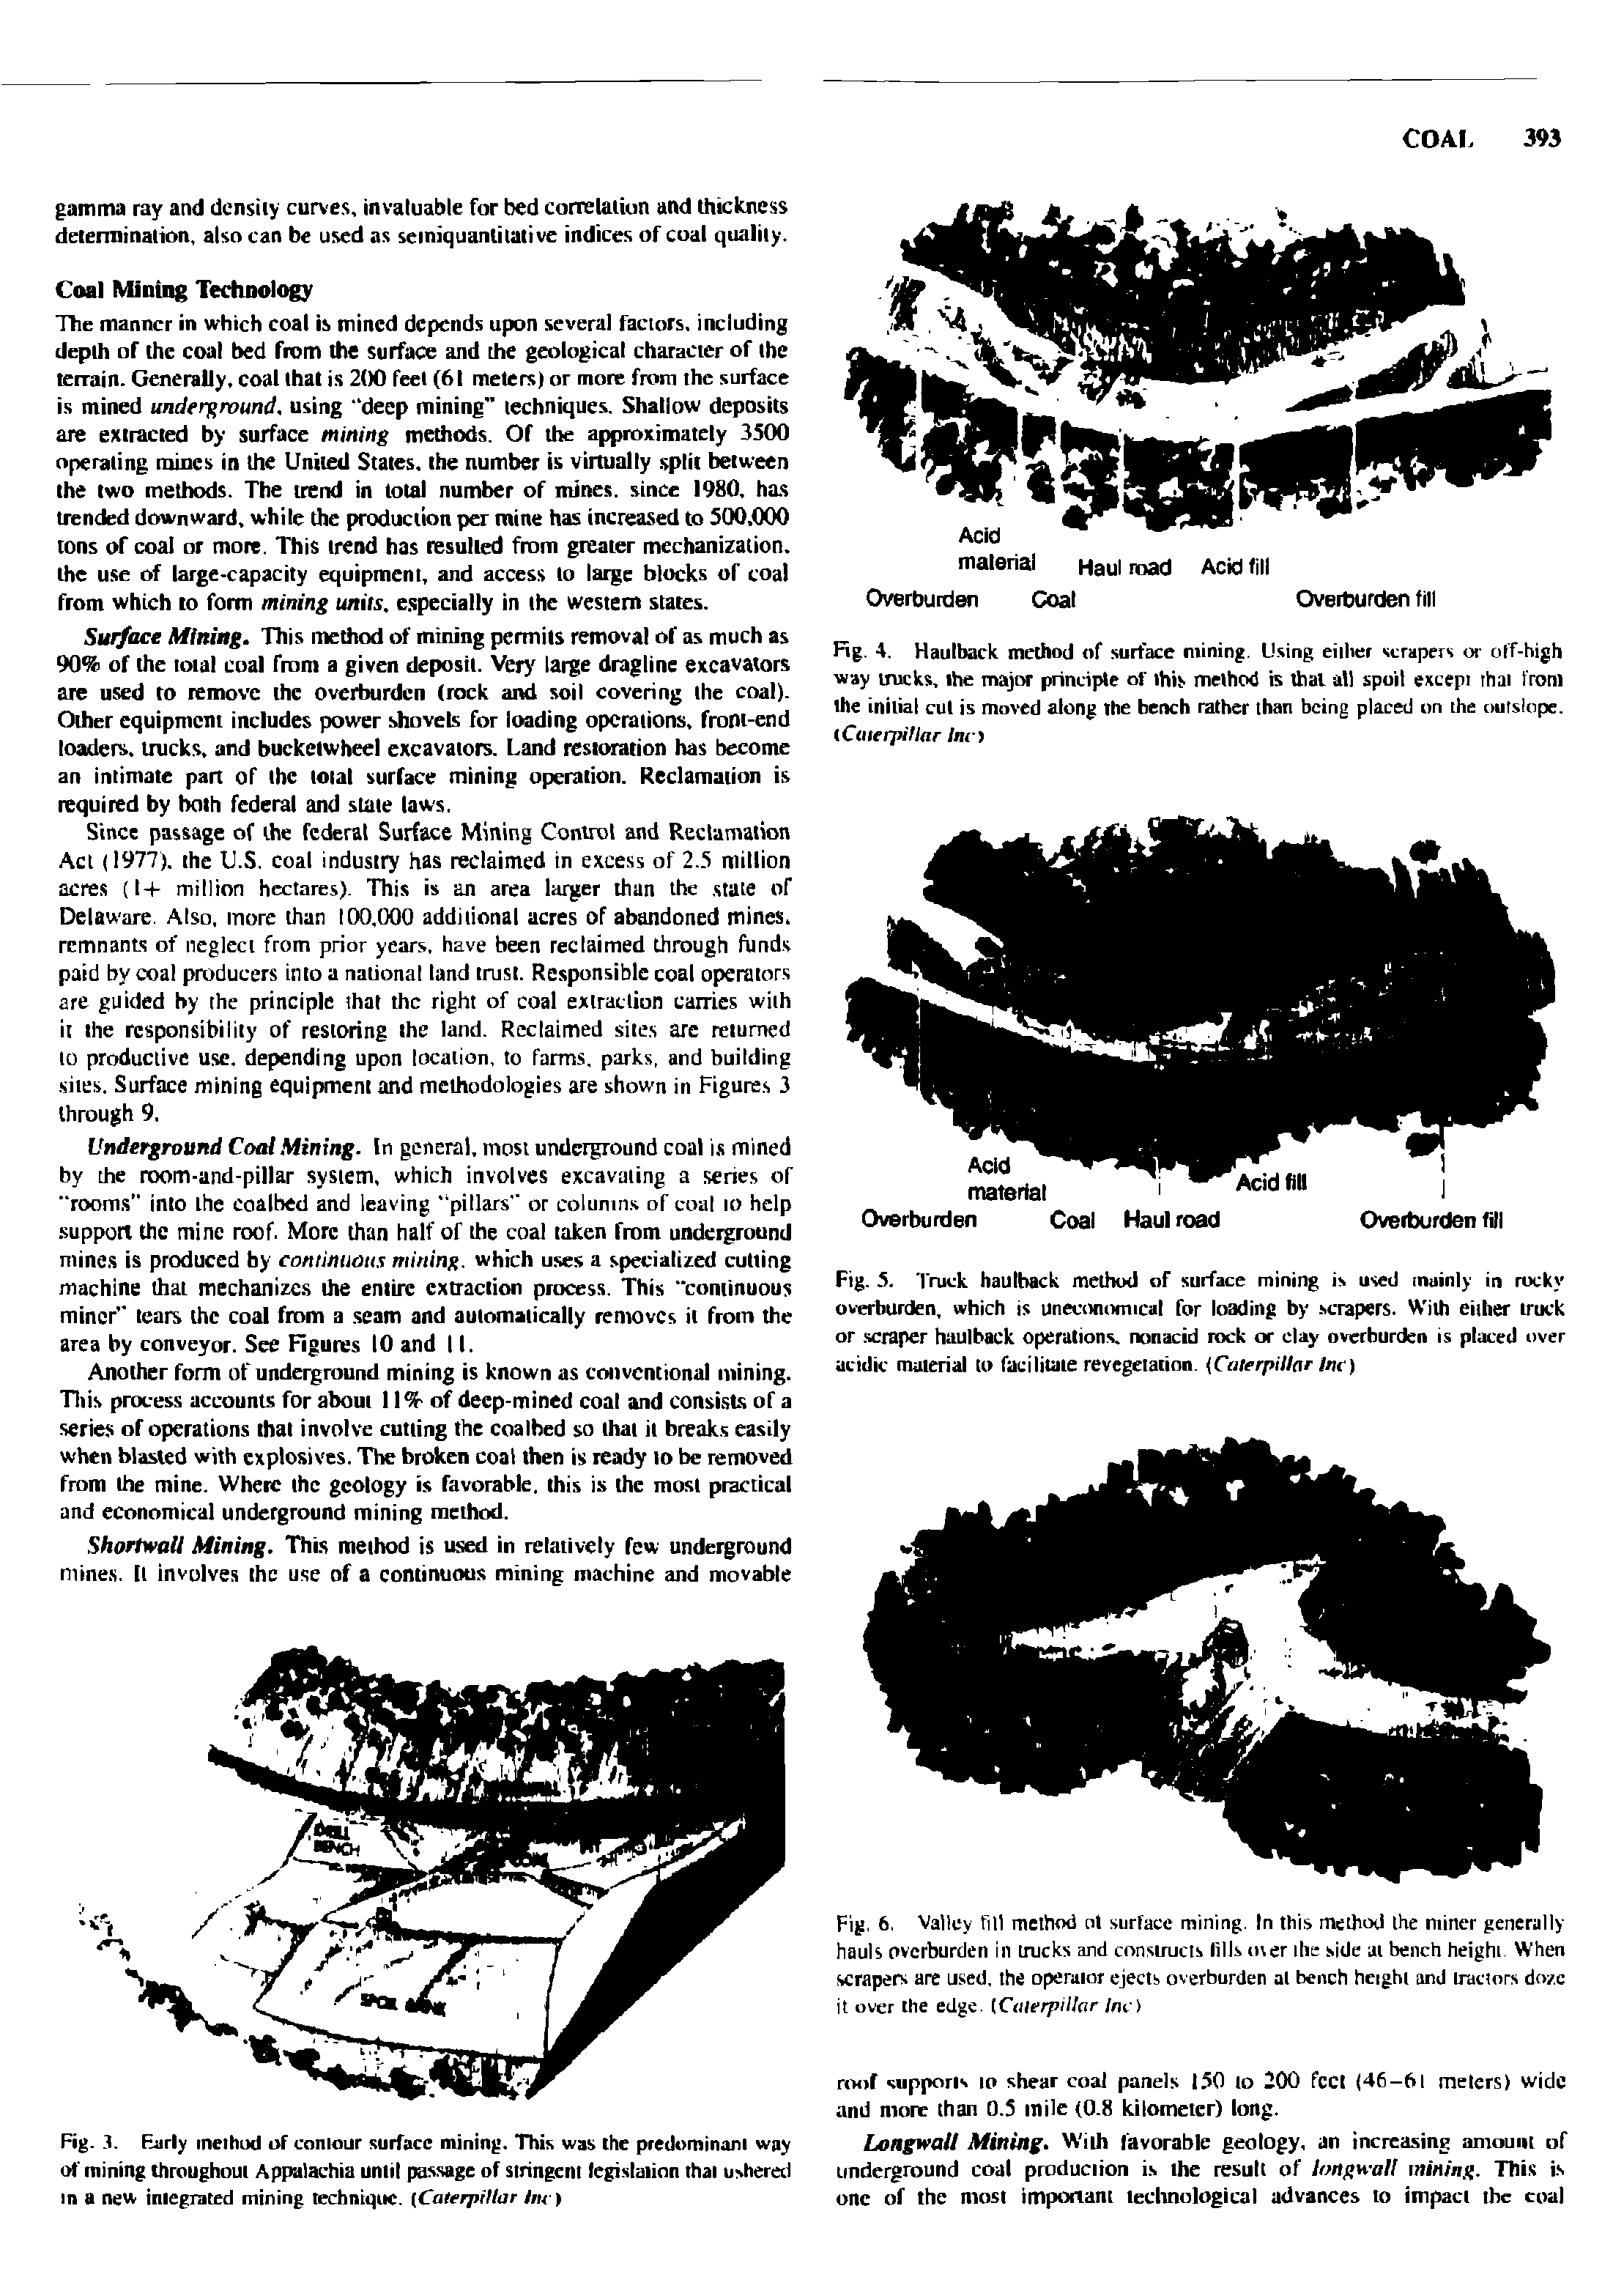 Fig. 3. Early method of contour surface mining. This was the predominant way of mining throughout Appalachia until passage of stringent legislation that ushered in a new integrated mining technique. [Caterpillar Ini)...